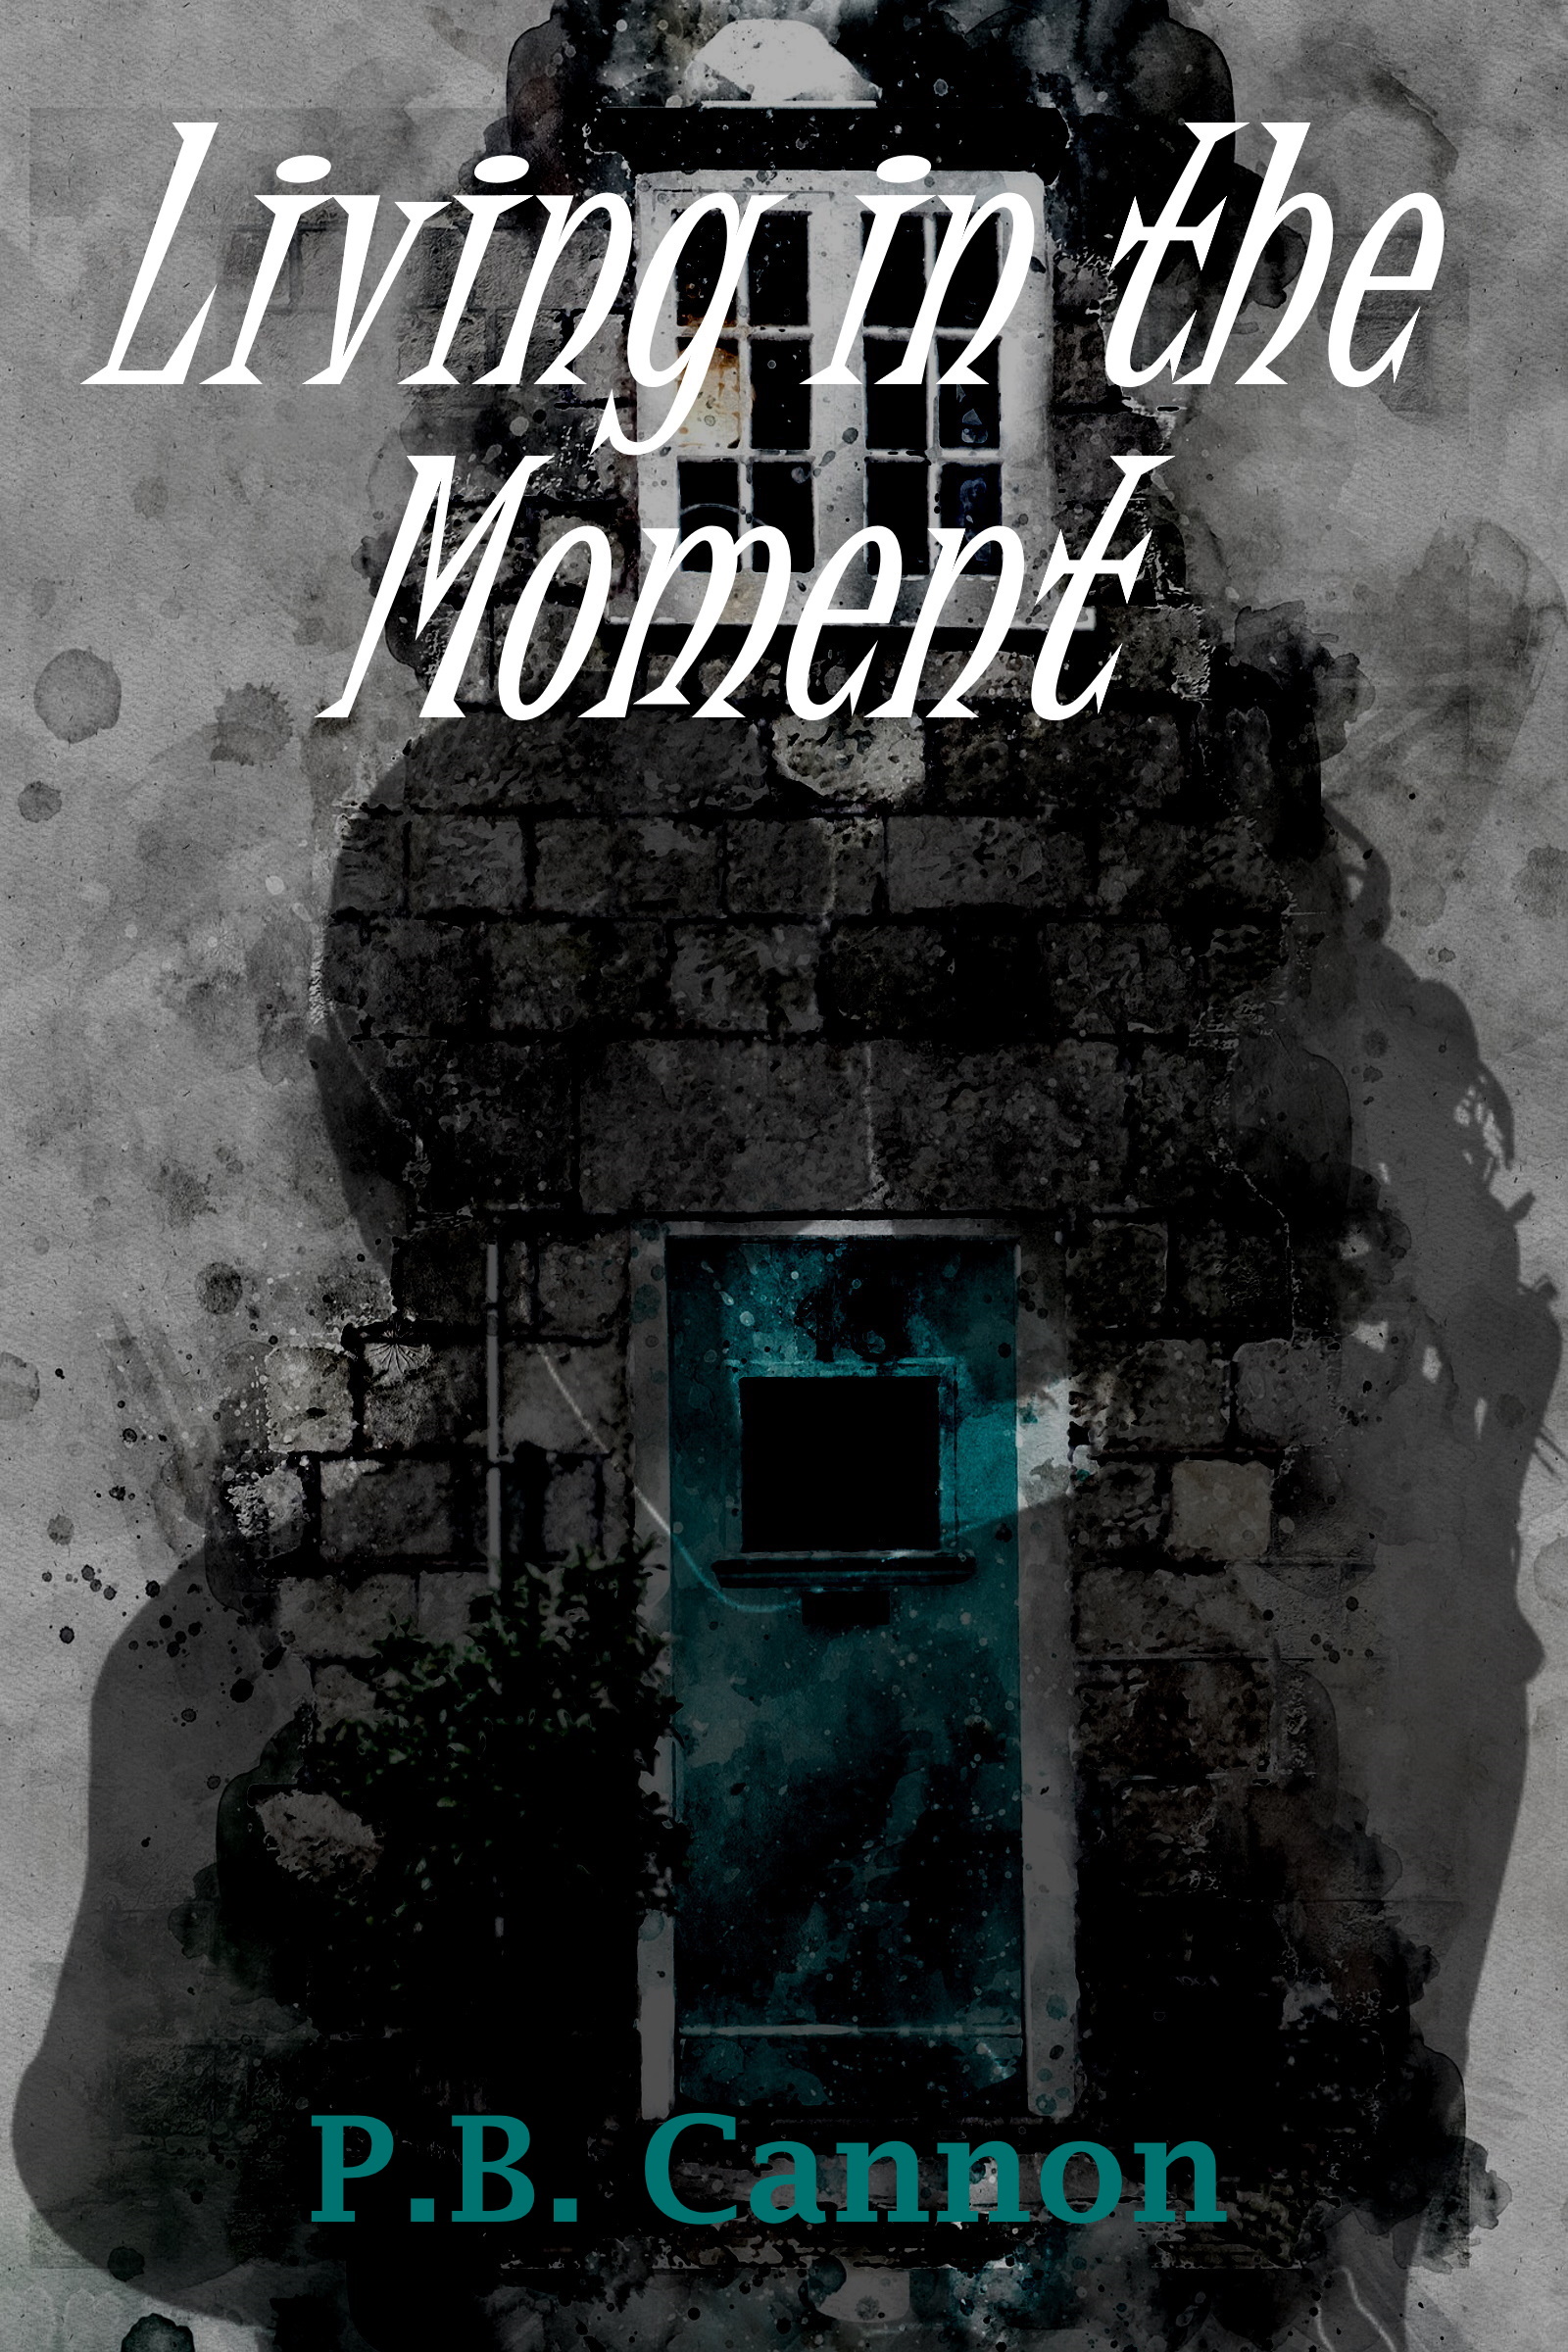 Living in the Moment alternate author name